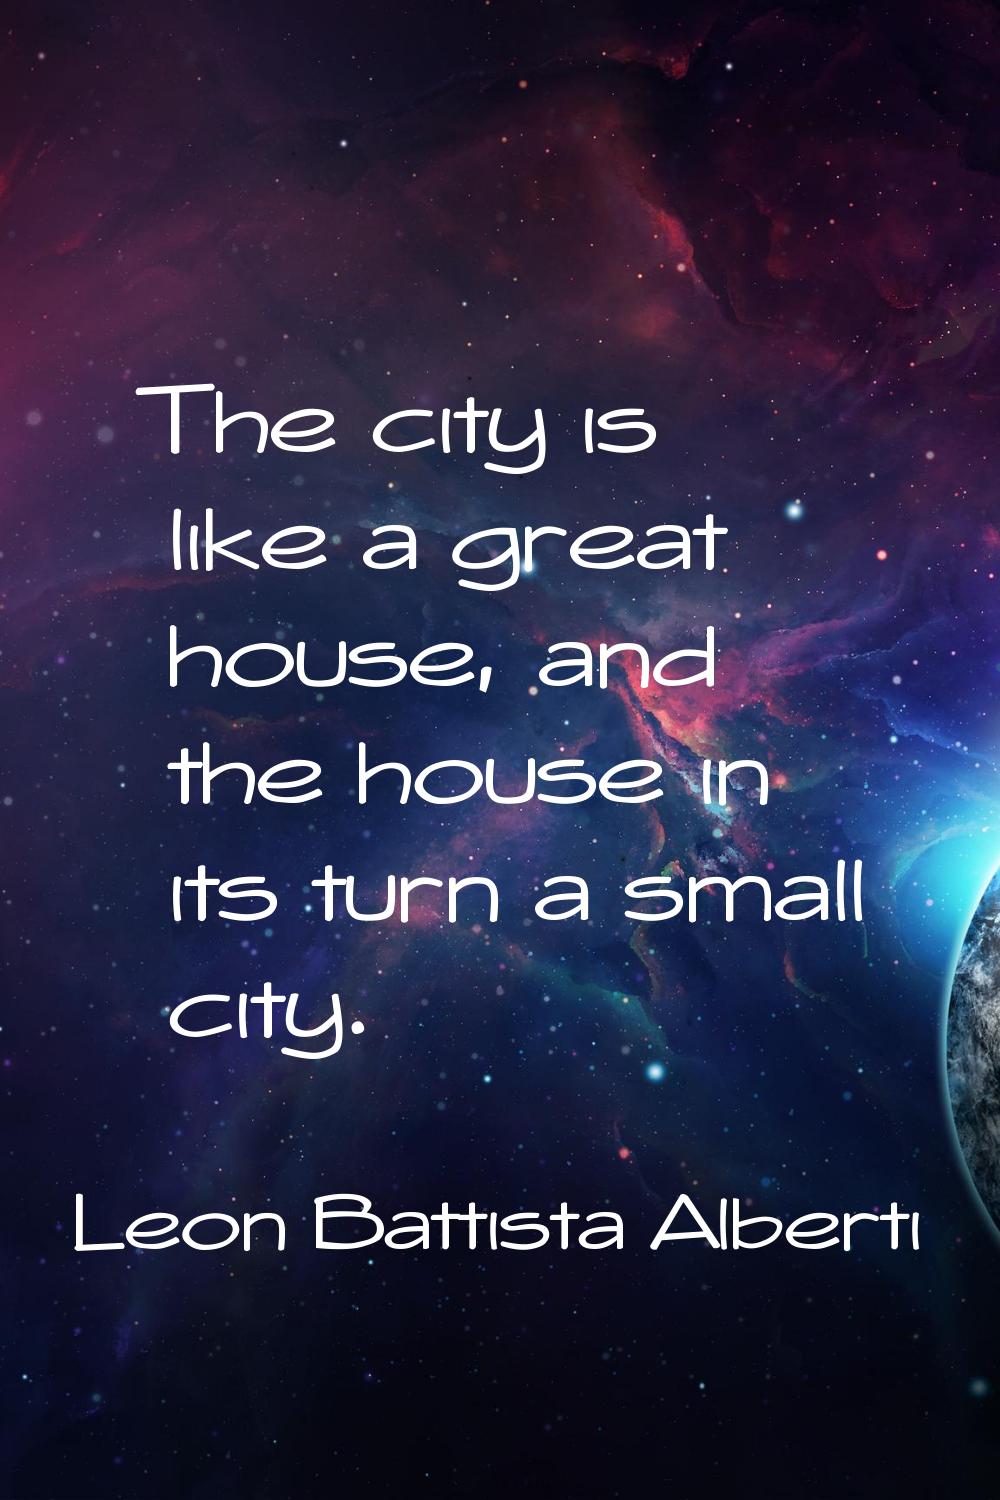 The city is like a great house, and the house in its turn a small city.